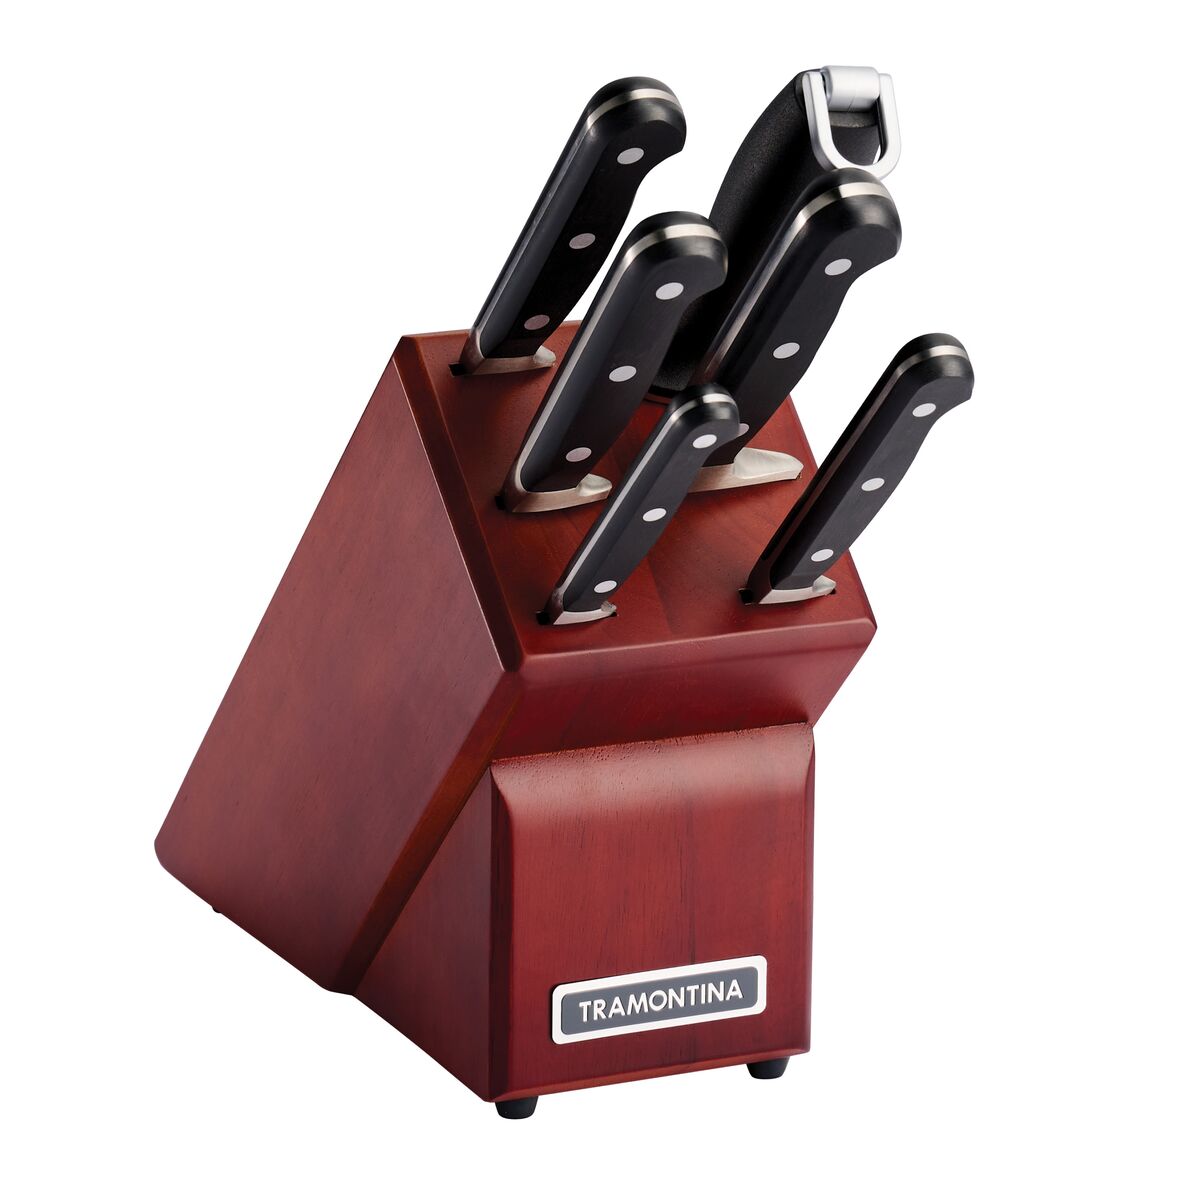 Forged 7 Pc Knife Set with Hardwood Counter Block